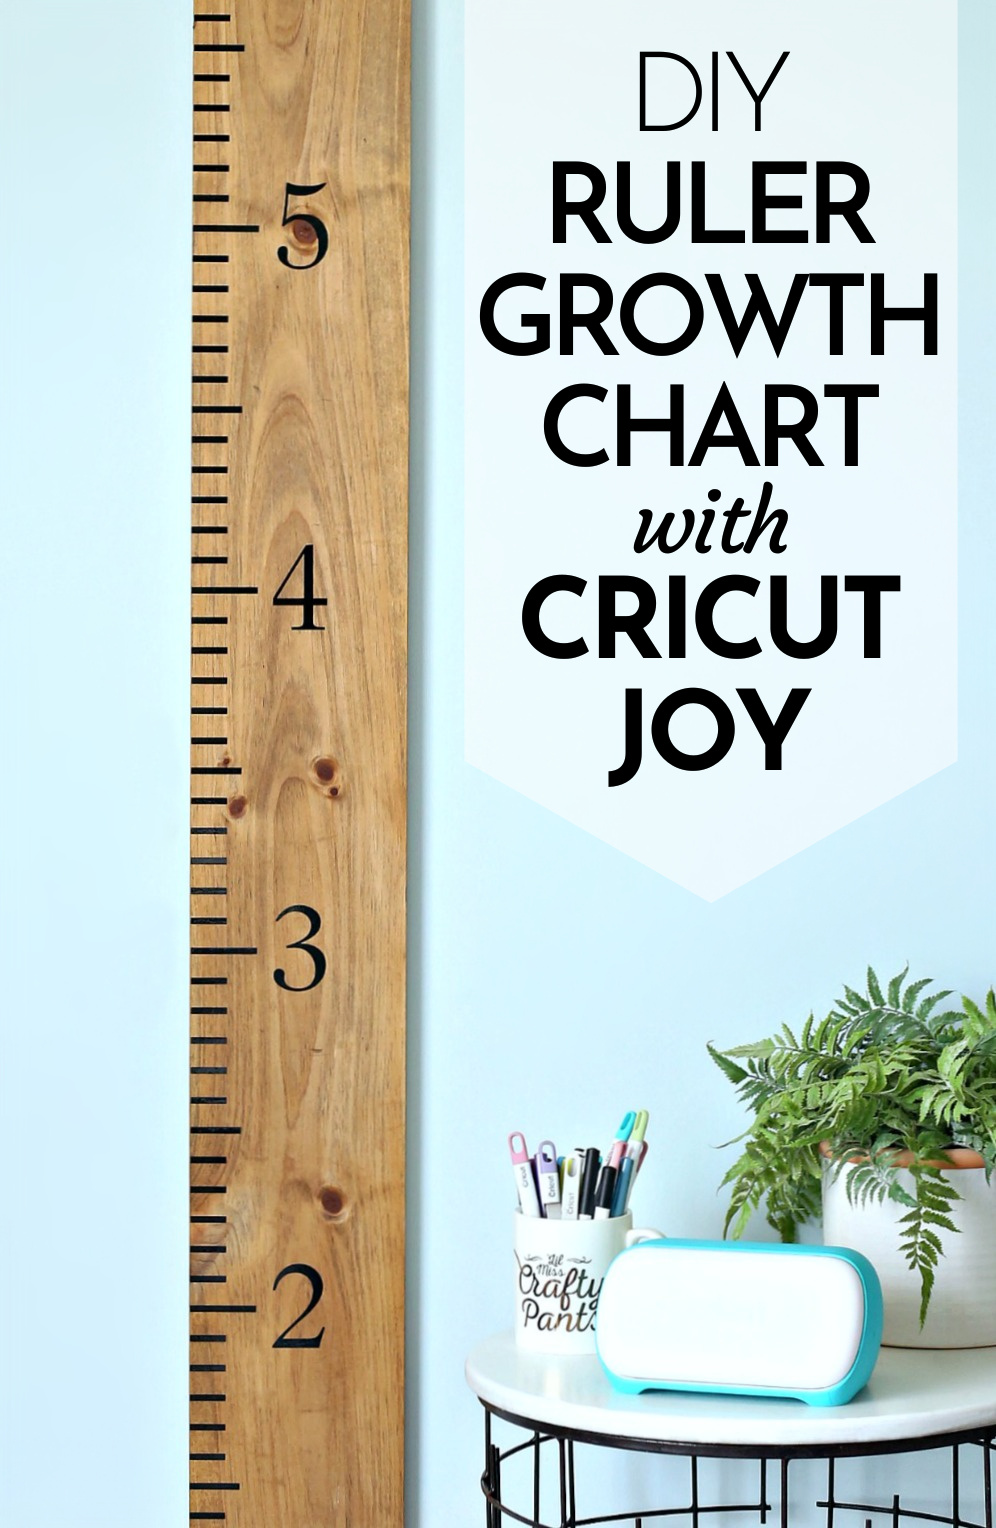 Download Diy Ruler Growth Chart With Cricut Joy Happy Go Lucky SVG, PNG, EPS, DXF File